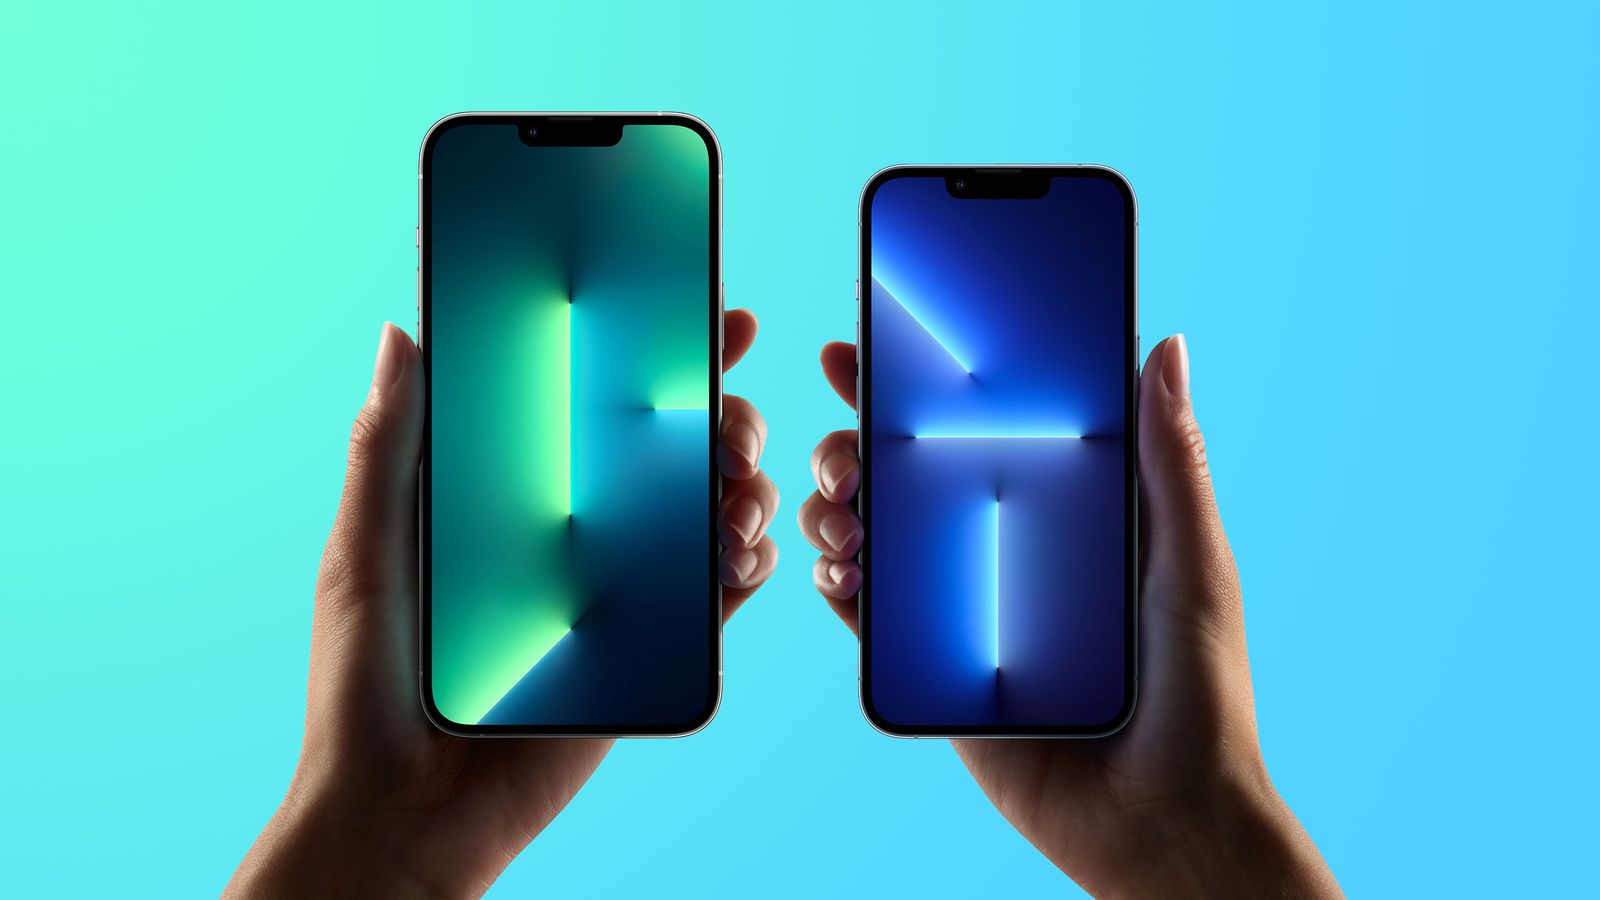 Apple unveils iPhone 13 Pro and iPhone 13 Pro Max — more pro than ever  before - Apple (IN)